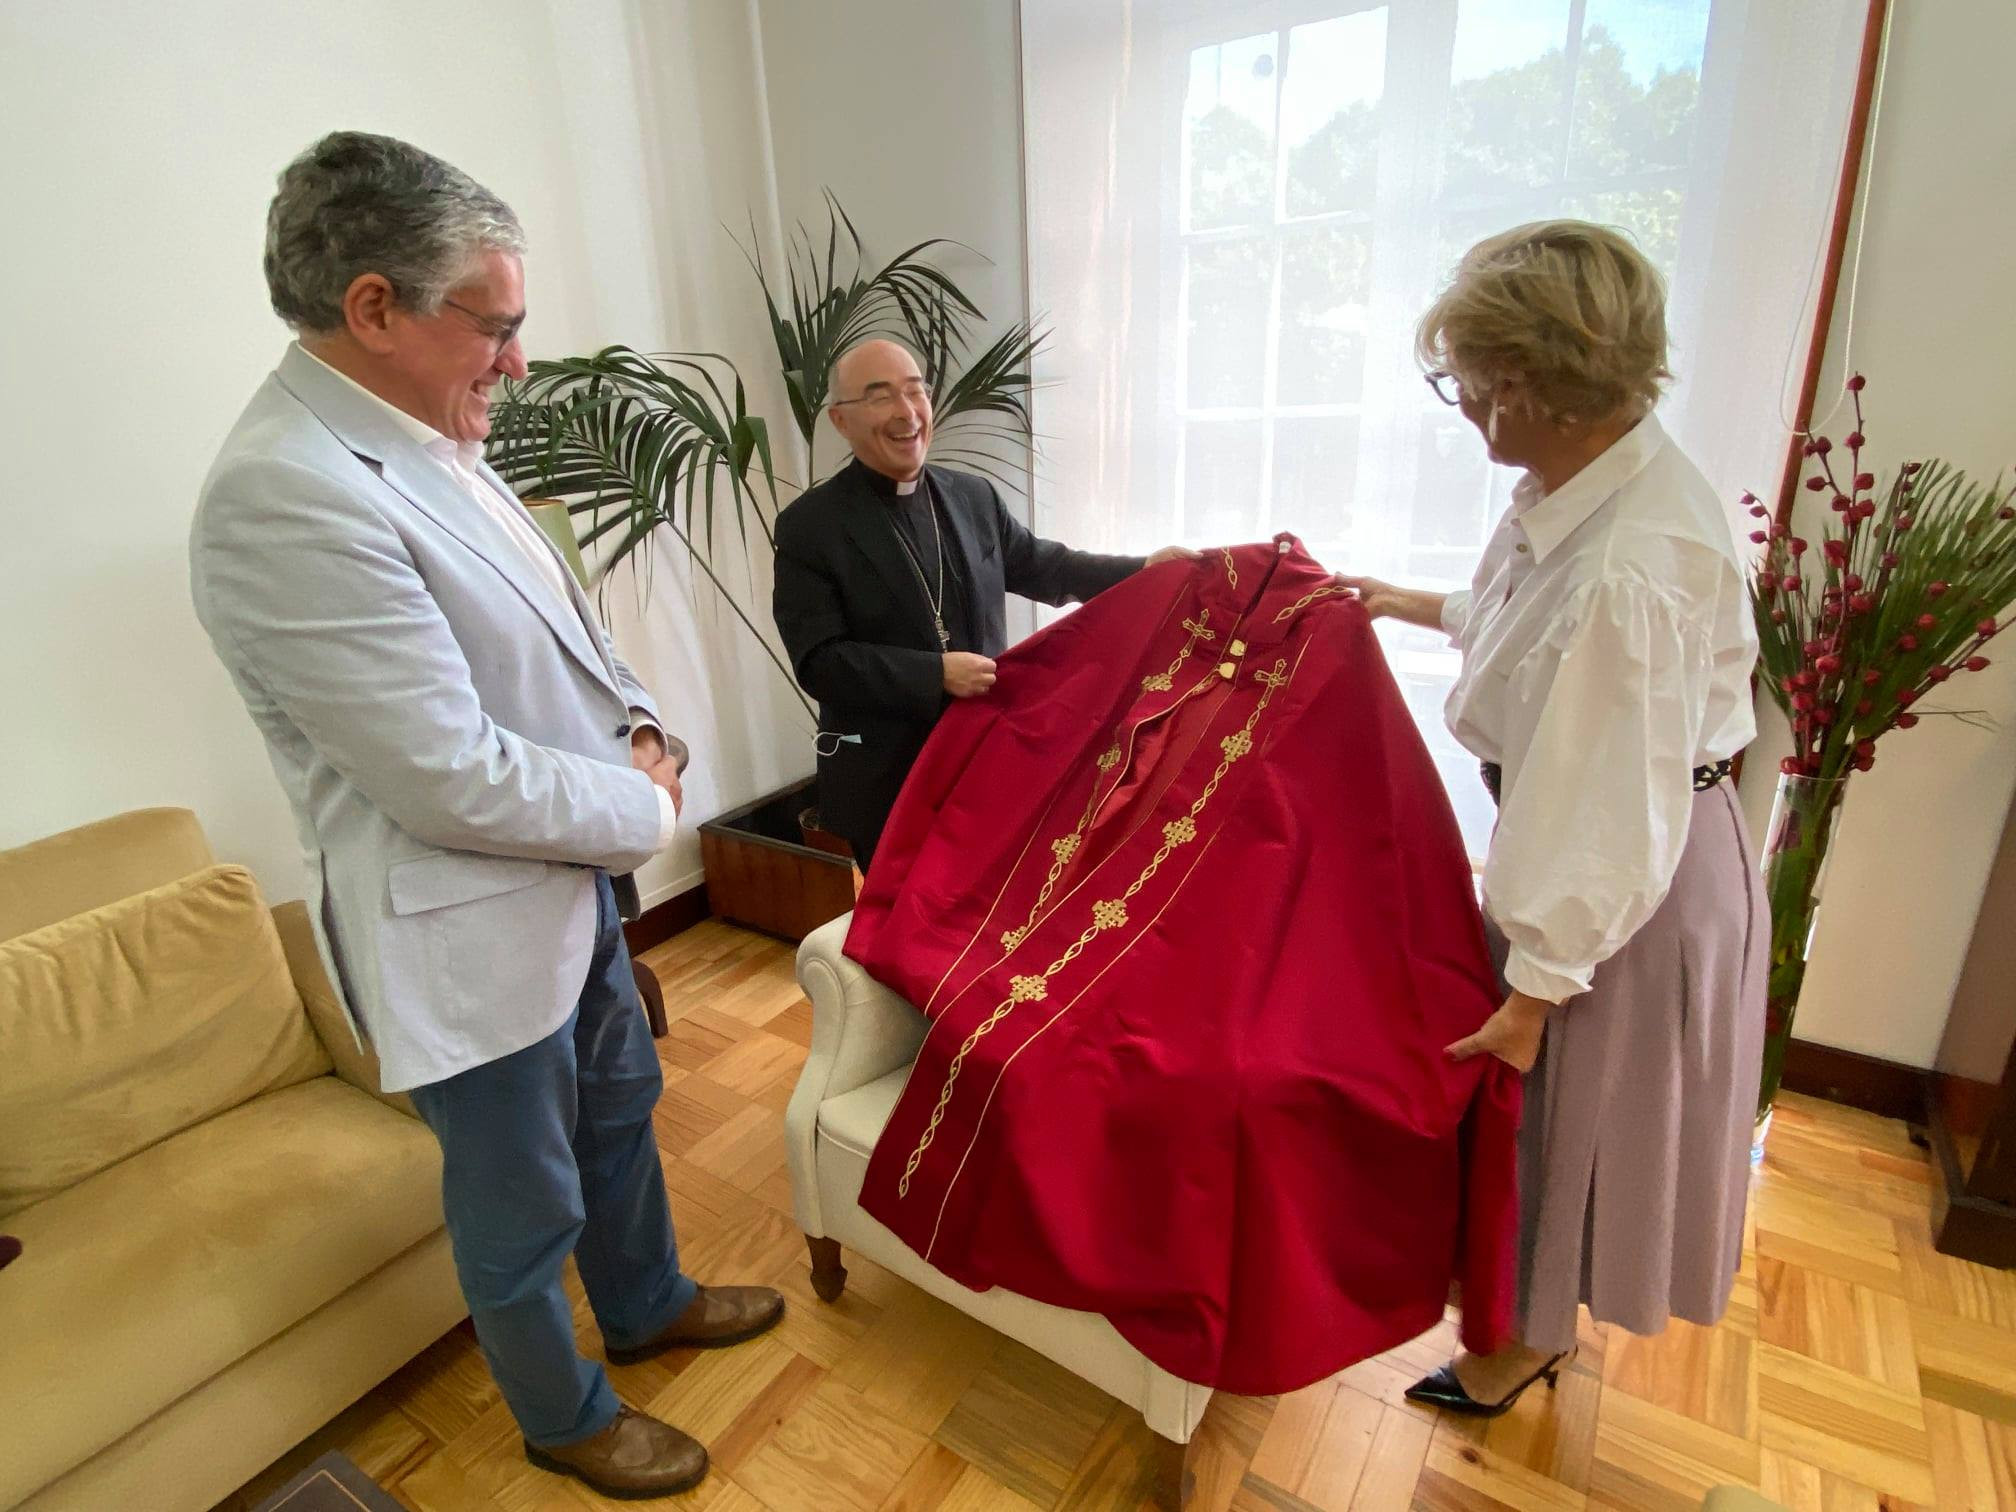 Funchal's Bishop ornamented with Madeira Embroidery